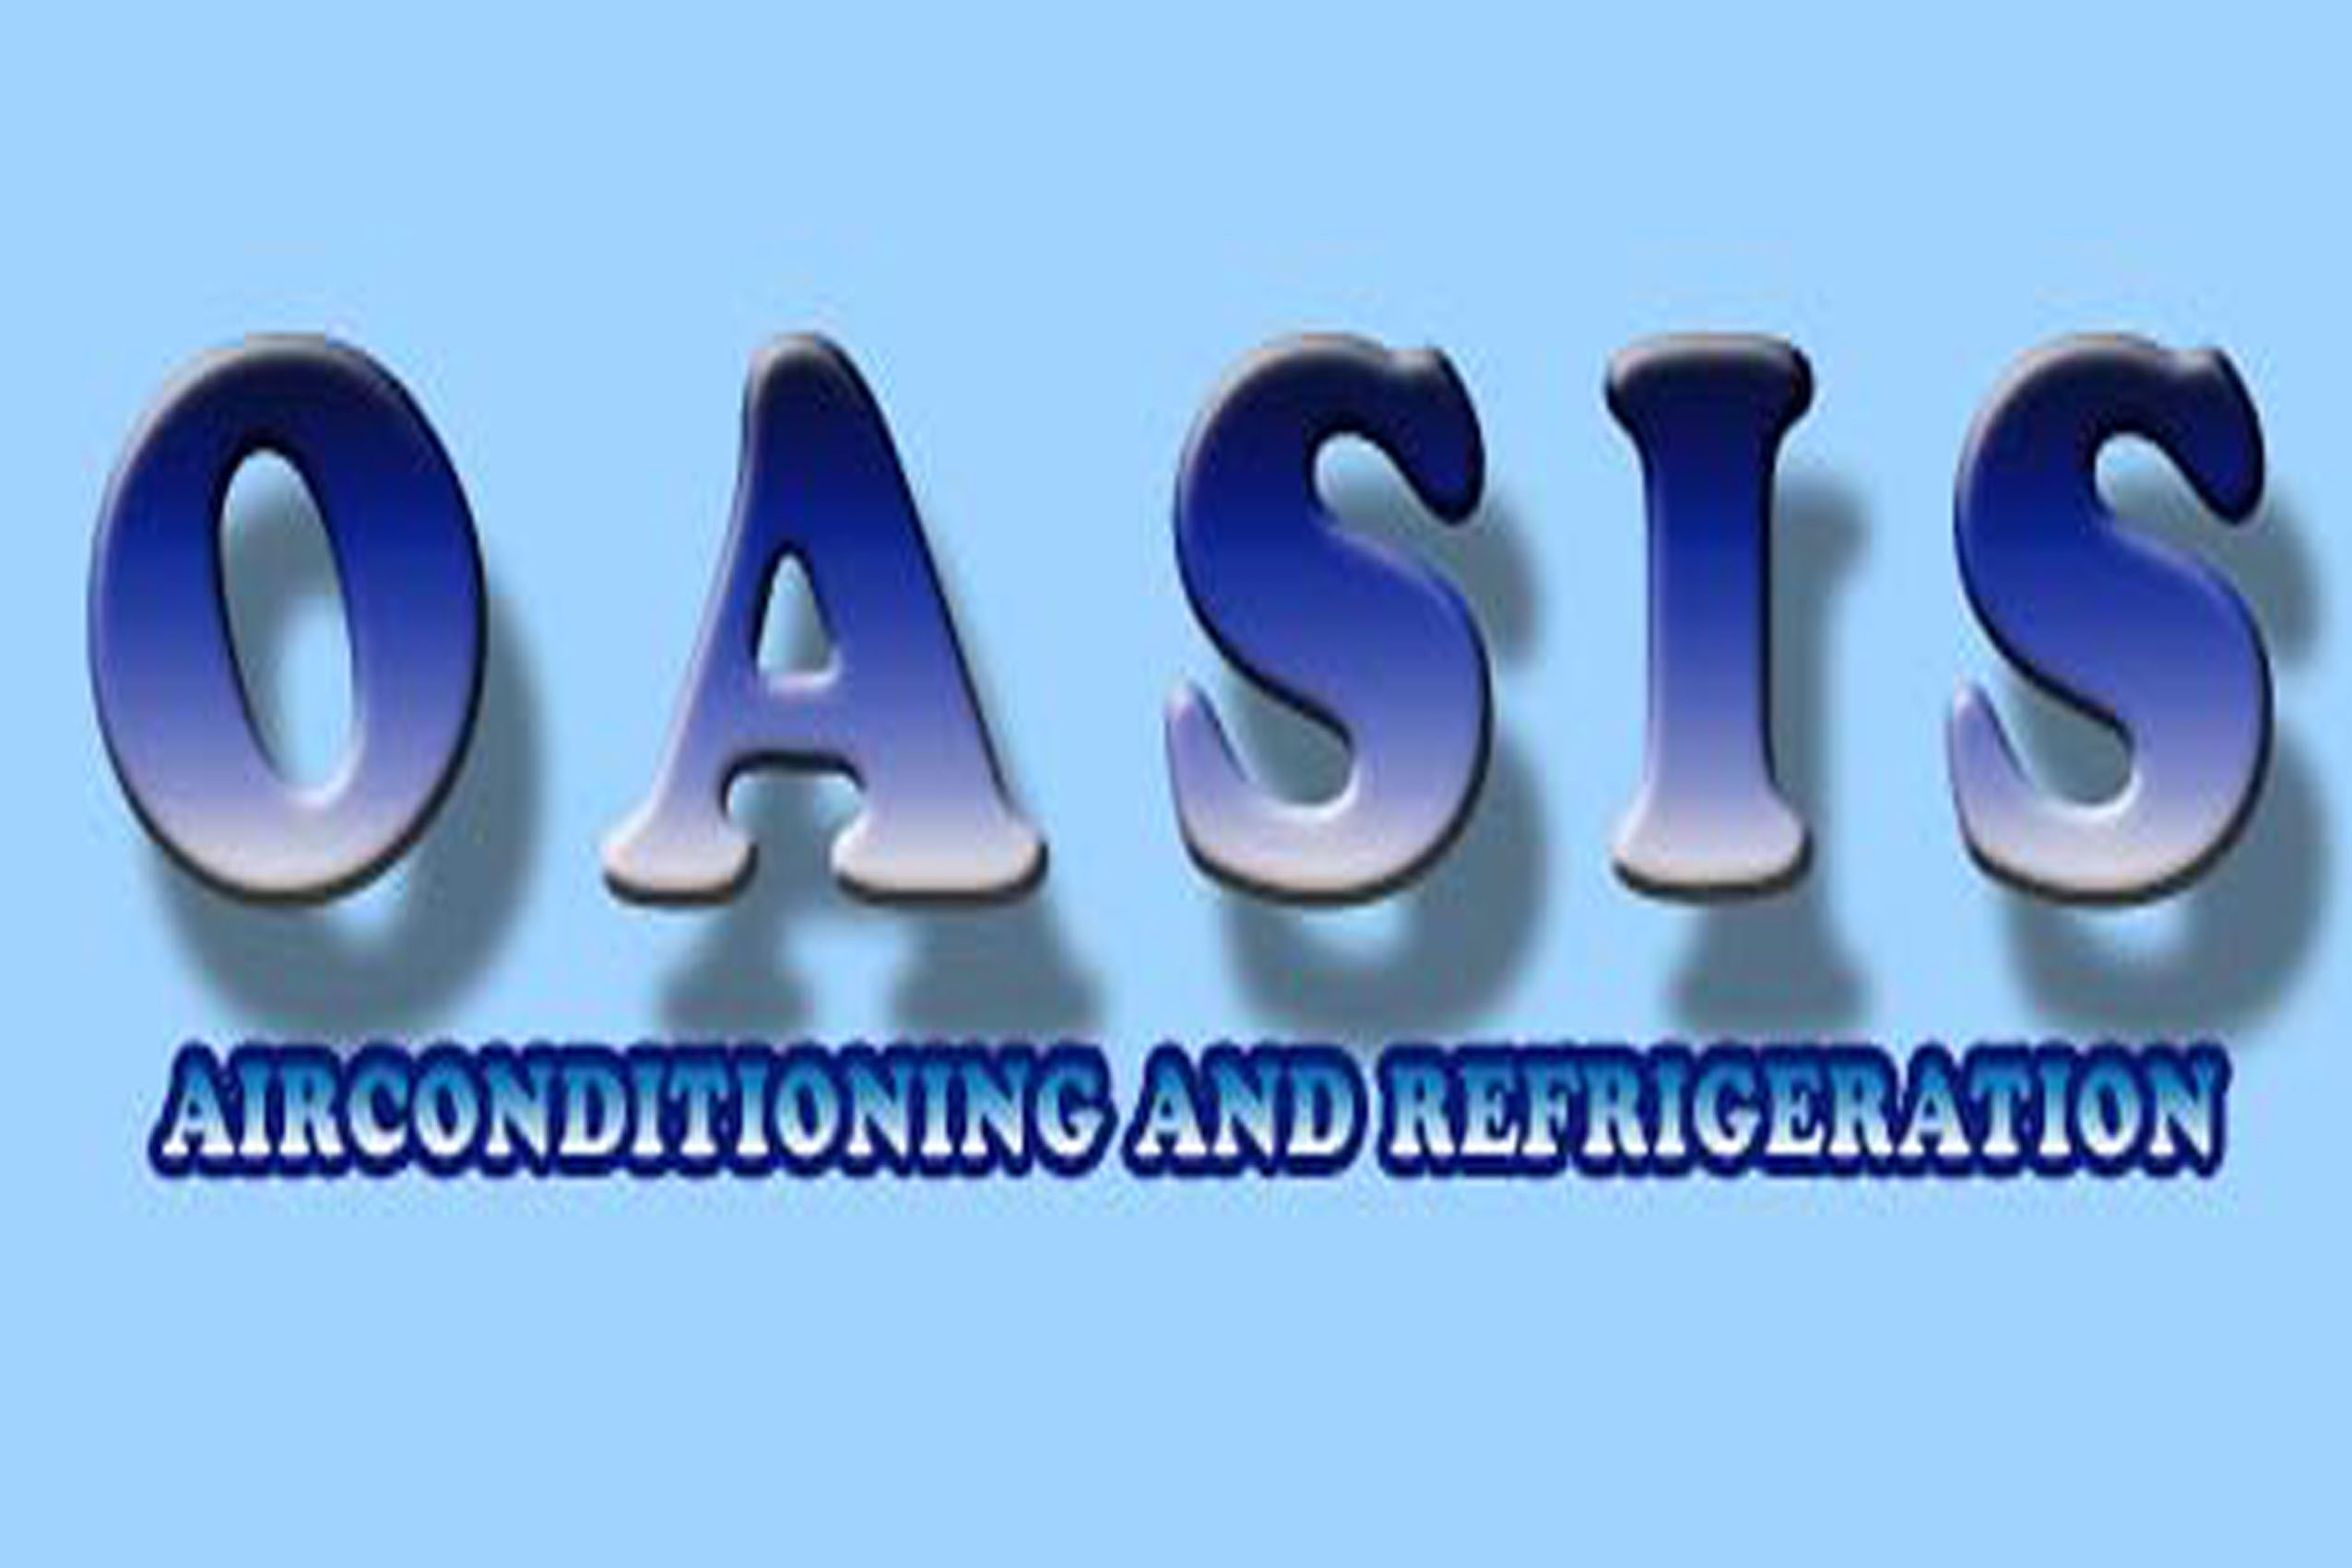 OASIS AIR CONDITIONING